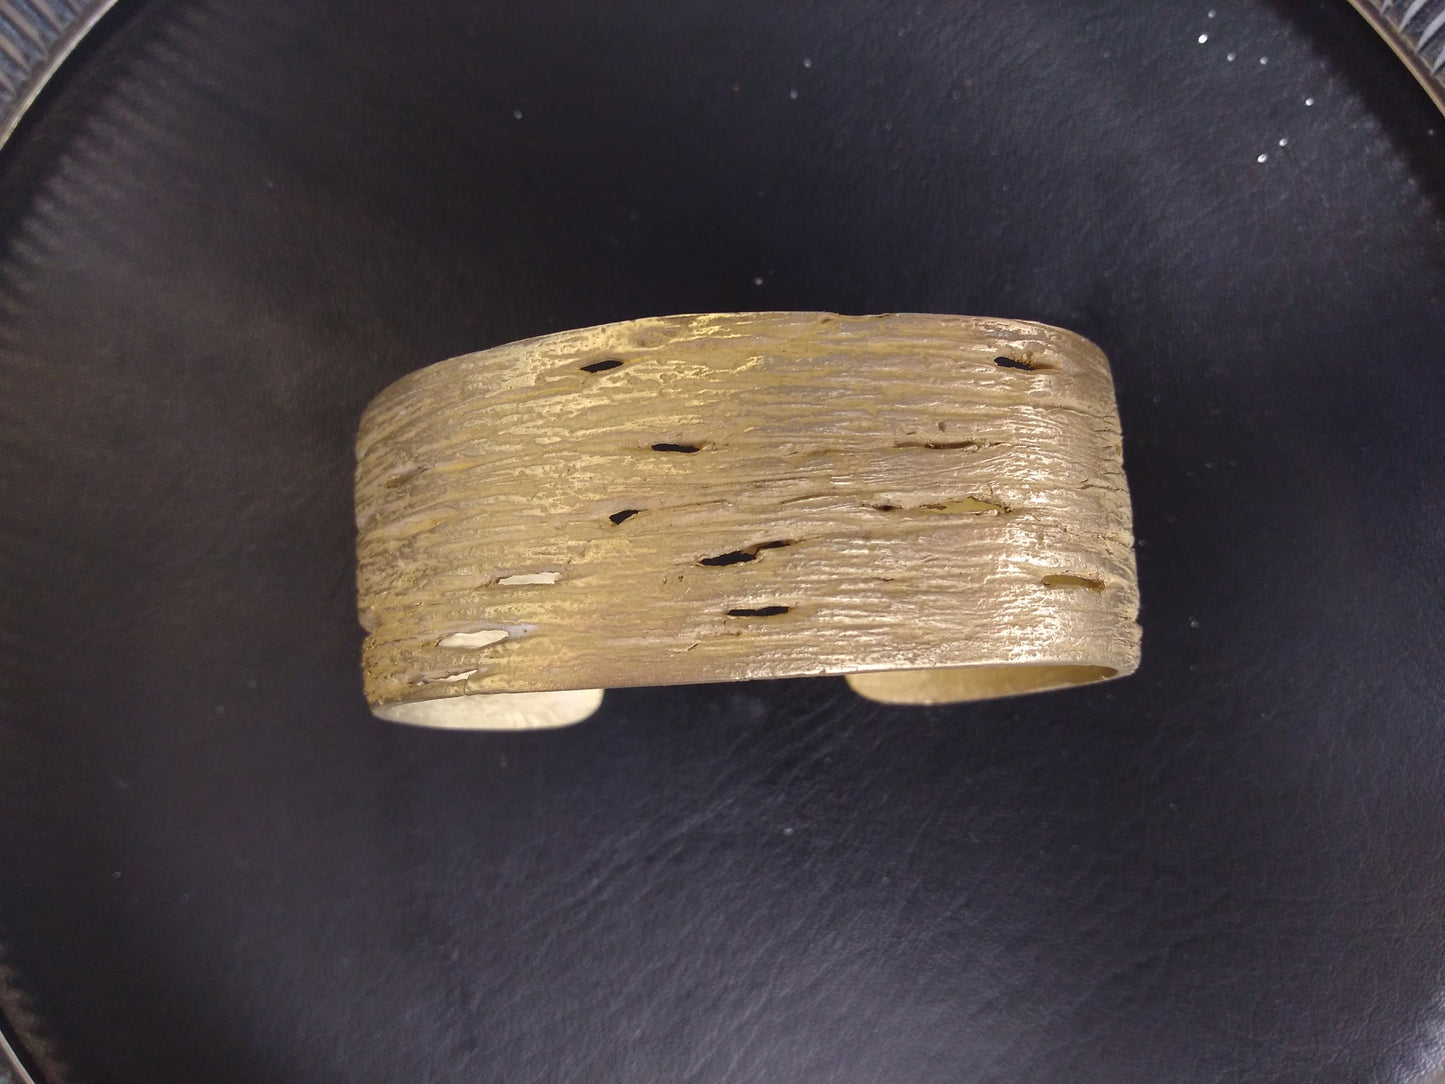 Birch bark striations and <meta charset="utf-8">horizontal pores (lenticels) are visible on this finely crafted bronze bangle cast from nature